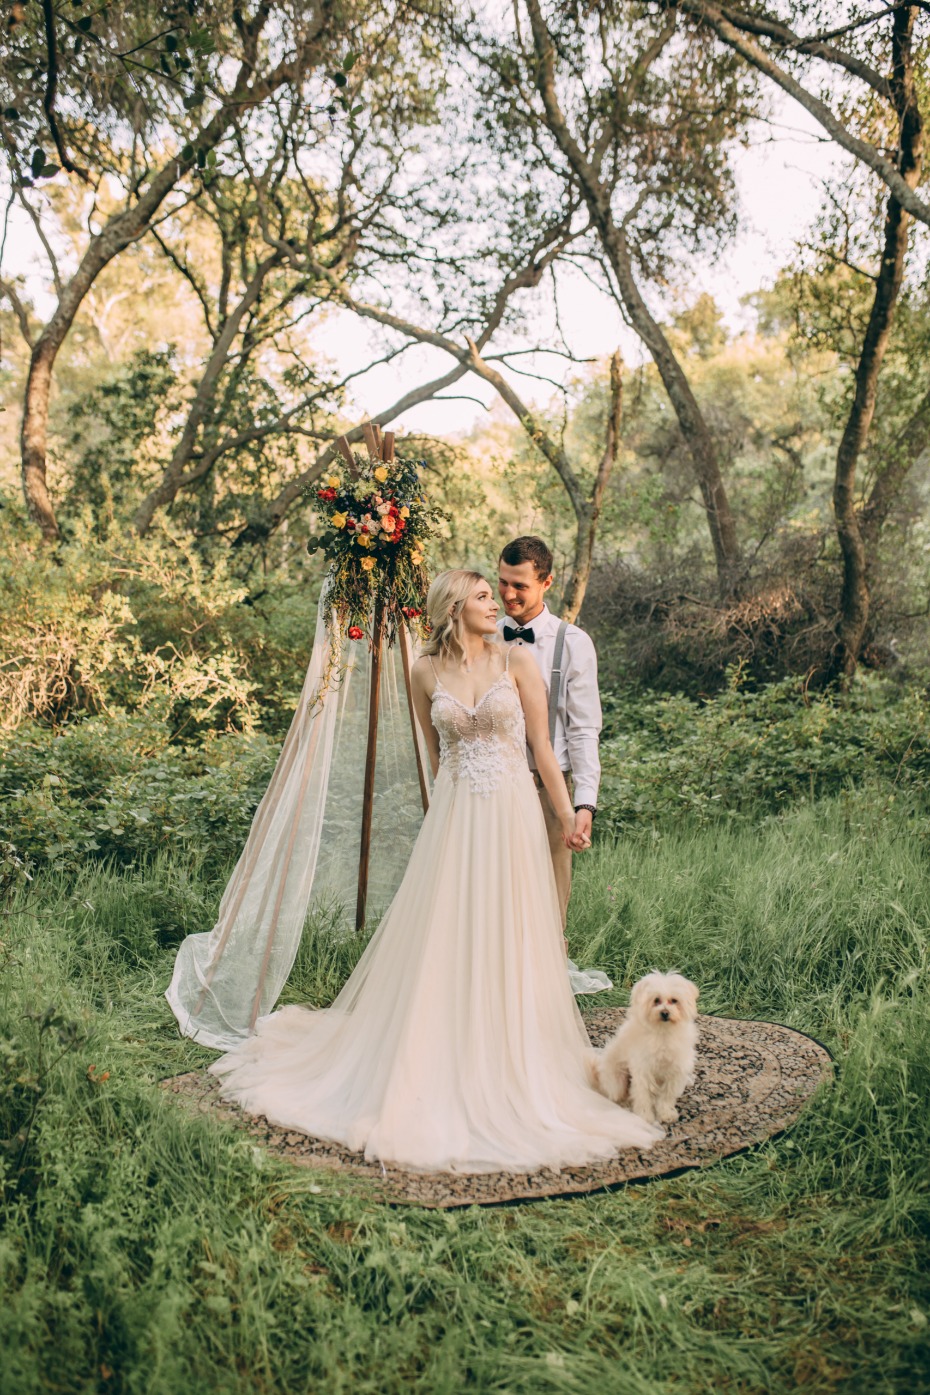 This Boho-Style Elopement Shoot at Folsom Lake Is Tee-Pee(p)-Worthy